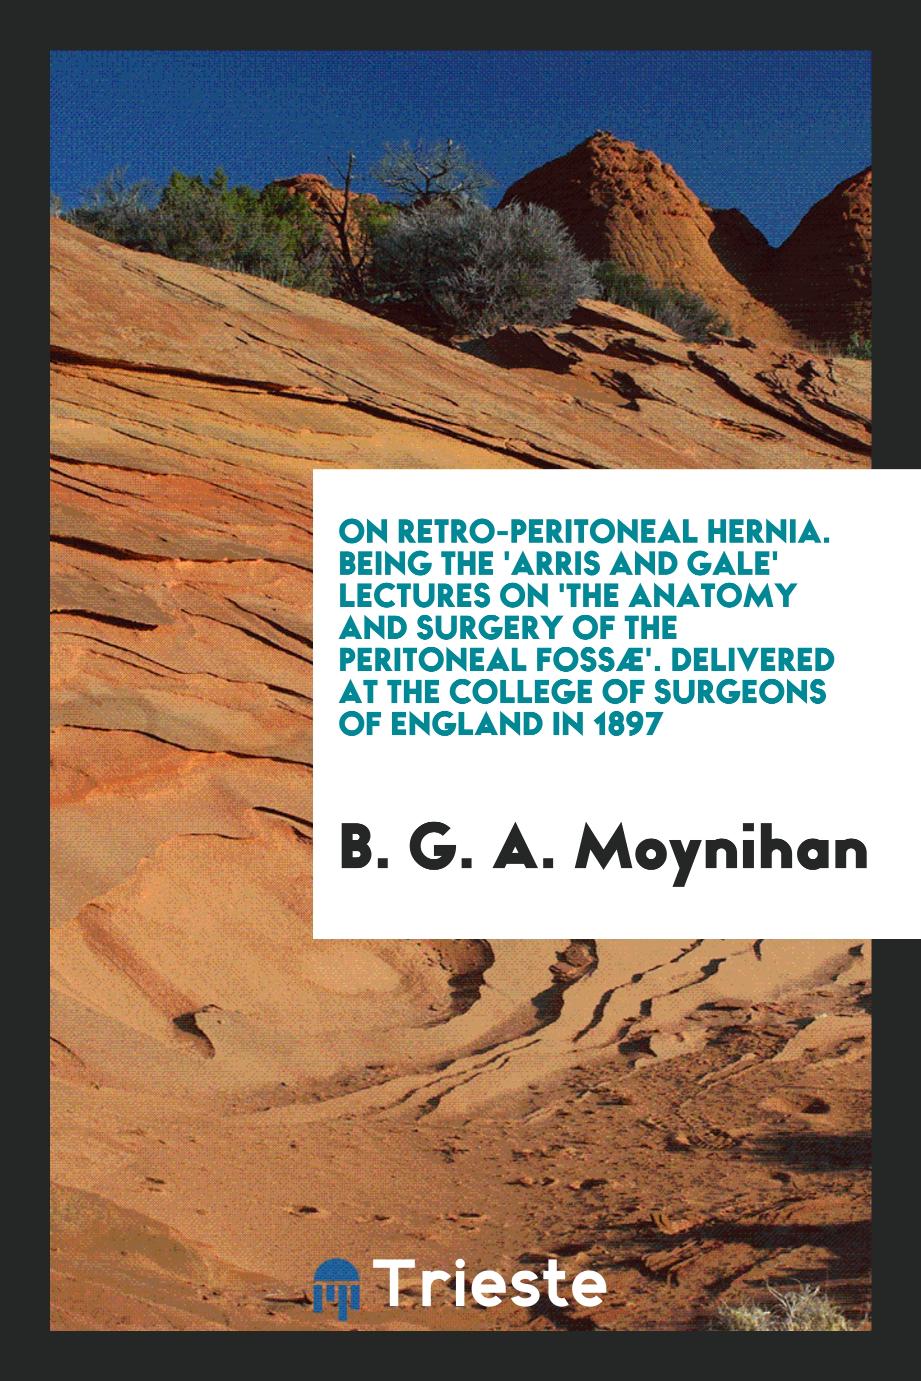 On Retro-Peritoneal Hernia. Being the 'Arris and Gale' Lectures on 'the Anatomy and Surgery of the Peritoneal Fossæ'. Delivered at the College of Surgeons of England in 1897